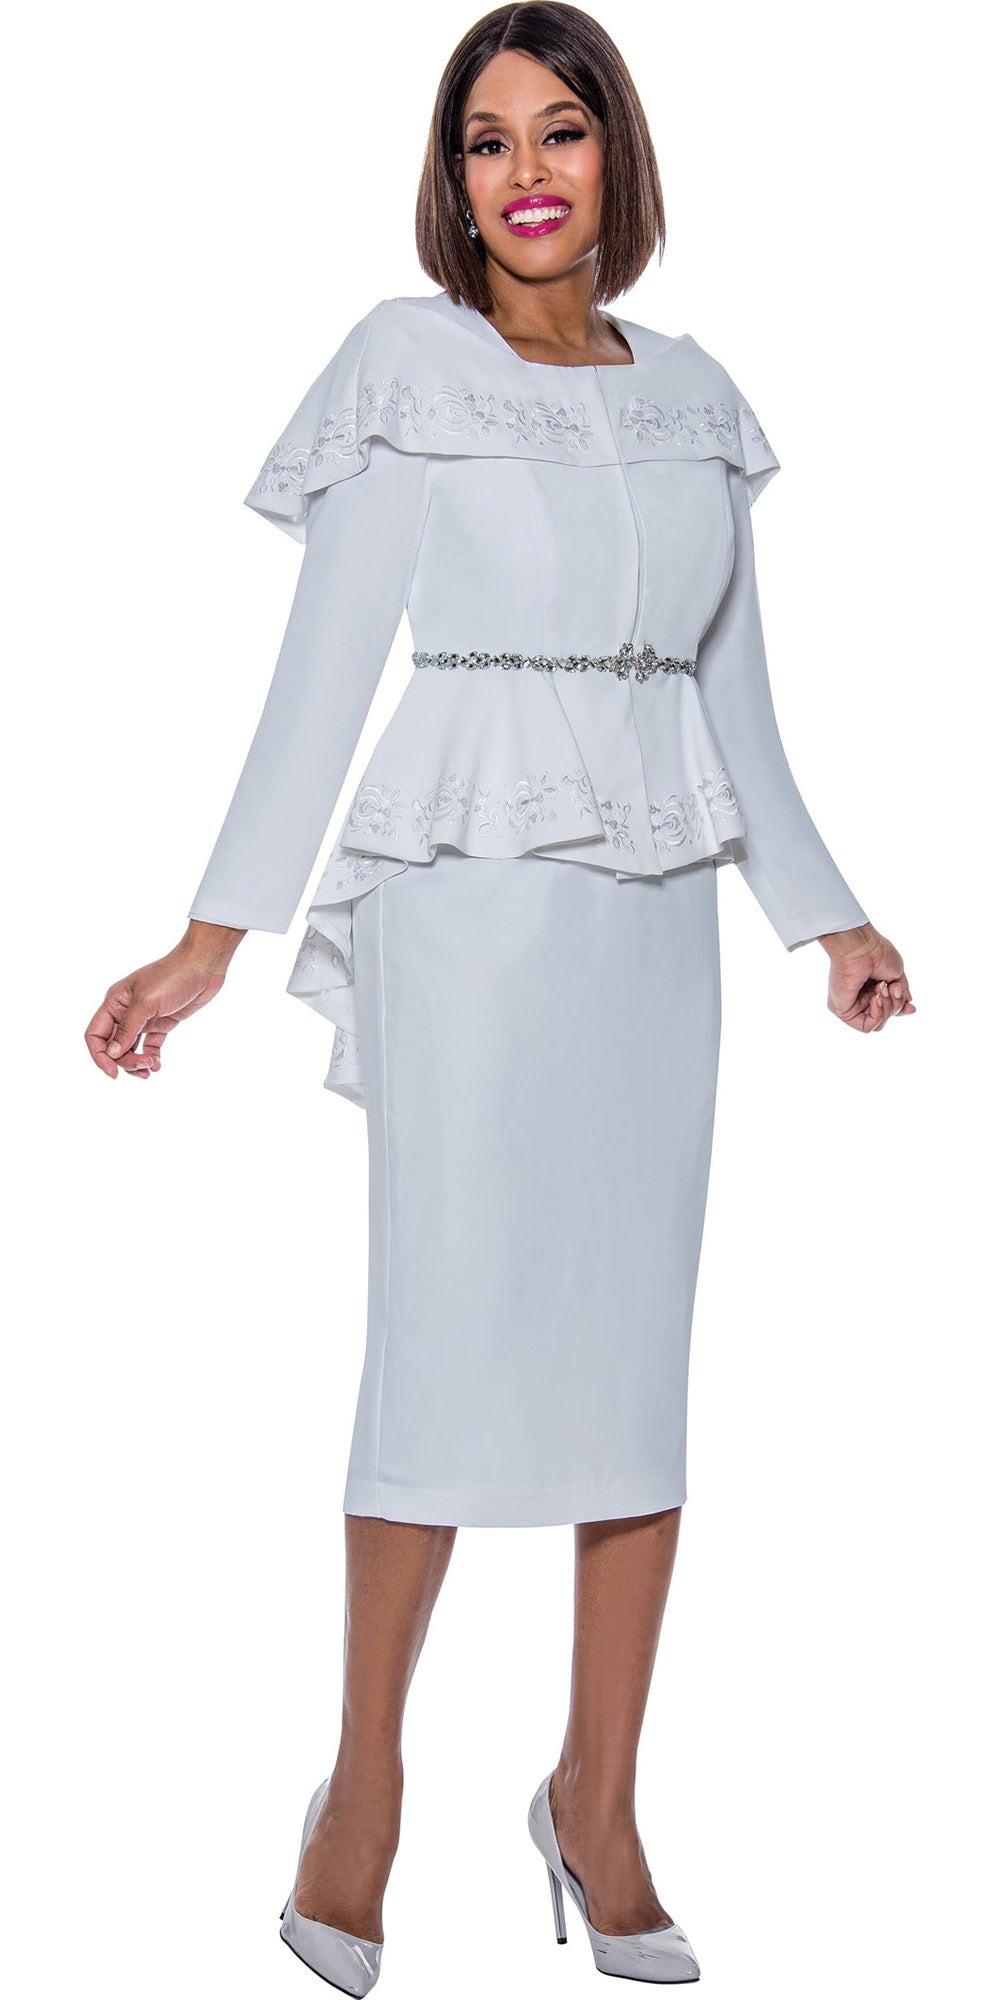 Divine Queen - DQ2162 - 2PC Embroidered Capelet High Low Peplum Skirt Suit